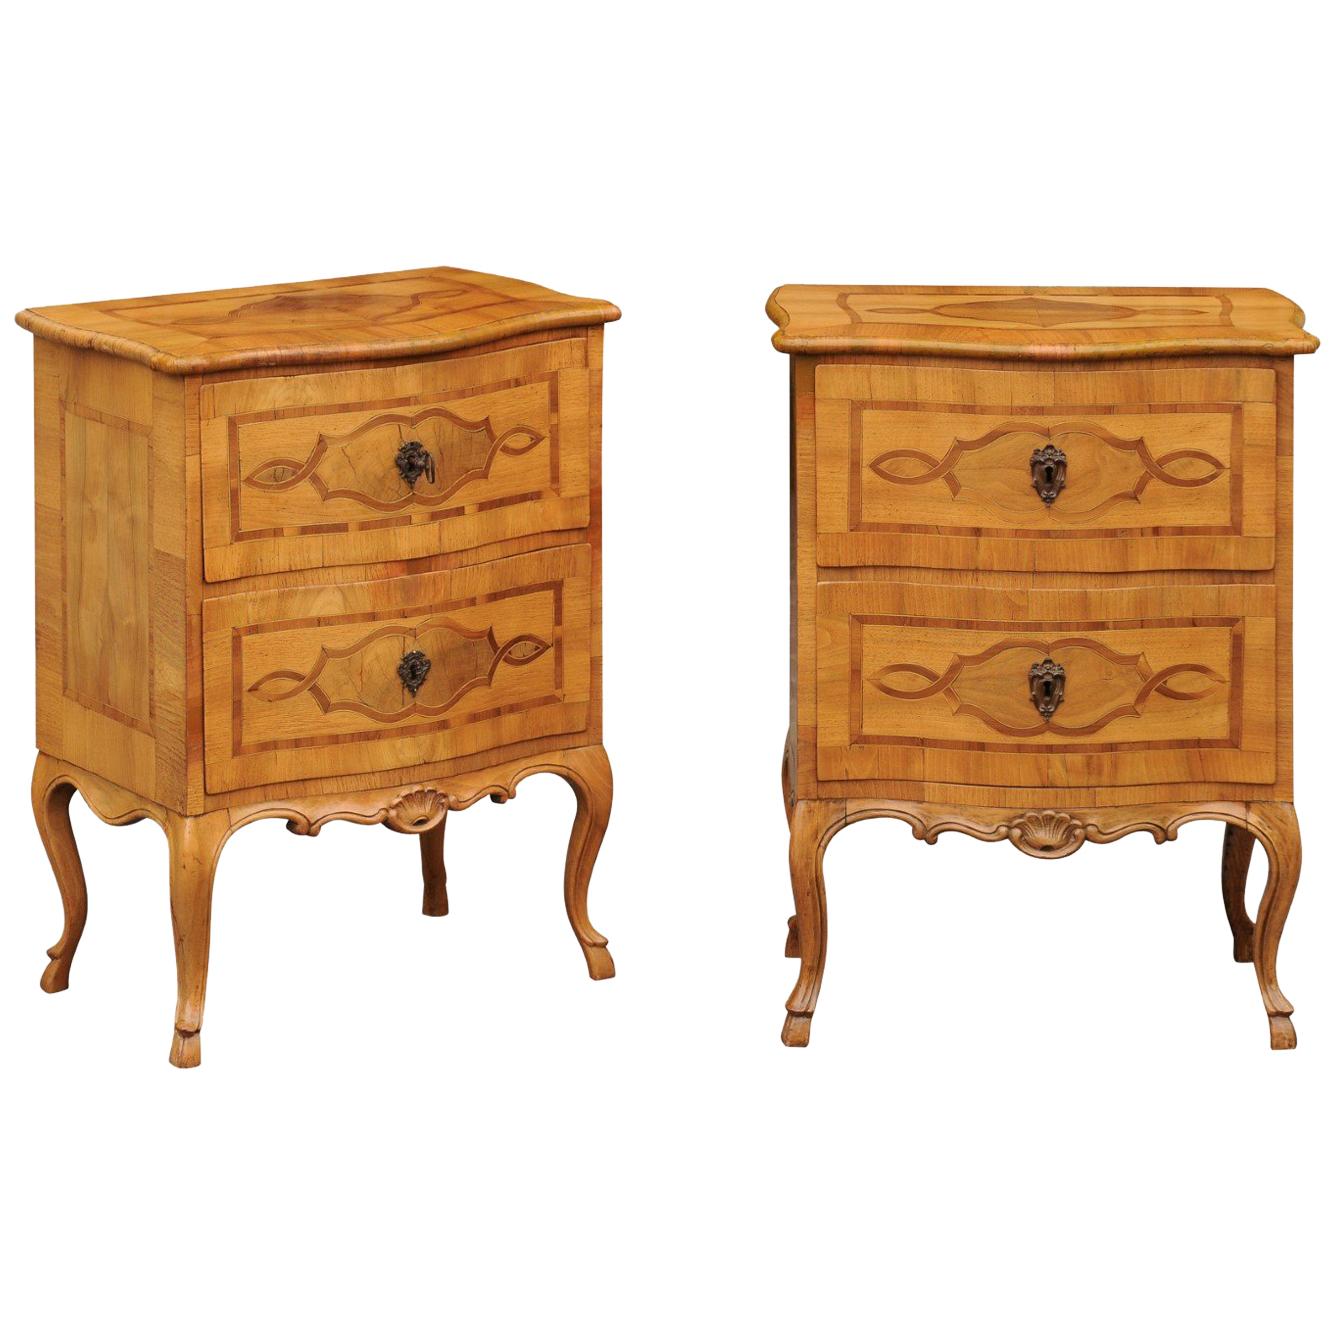 Pair of French 1870s Walnut Louis XV Style Small Commodes with Inlaid Cartouches